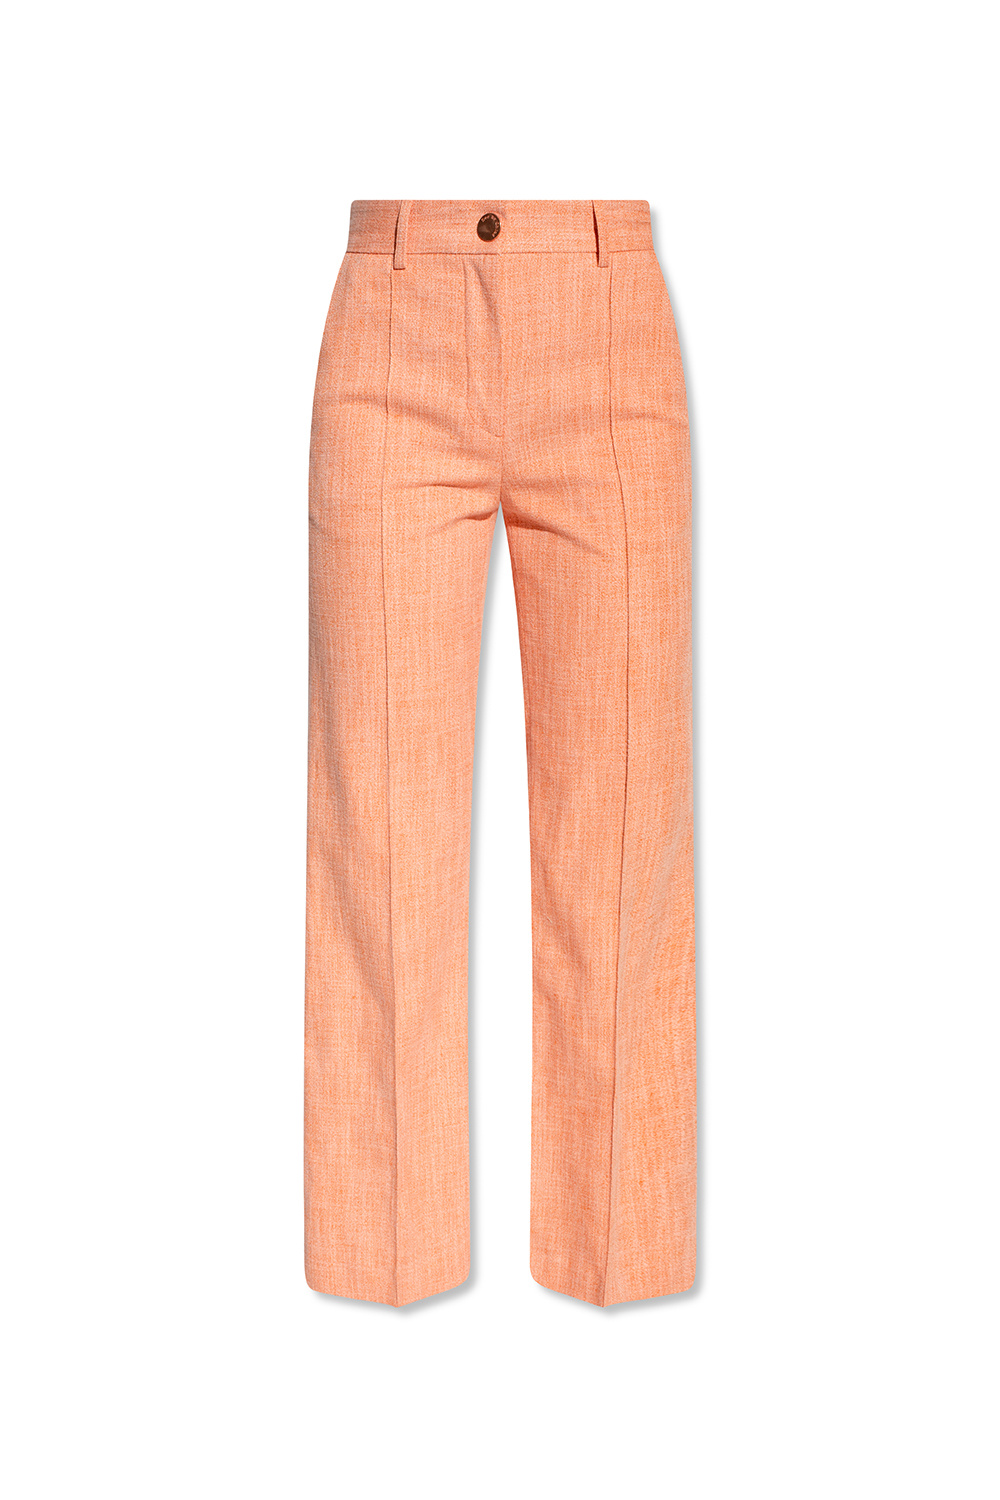 See By Chloe Flared trousers